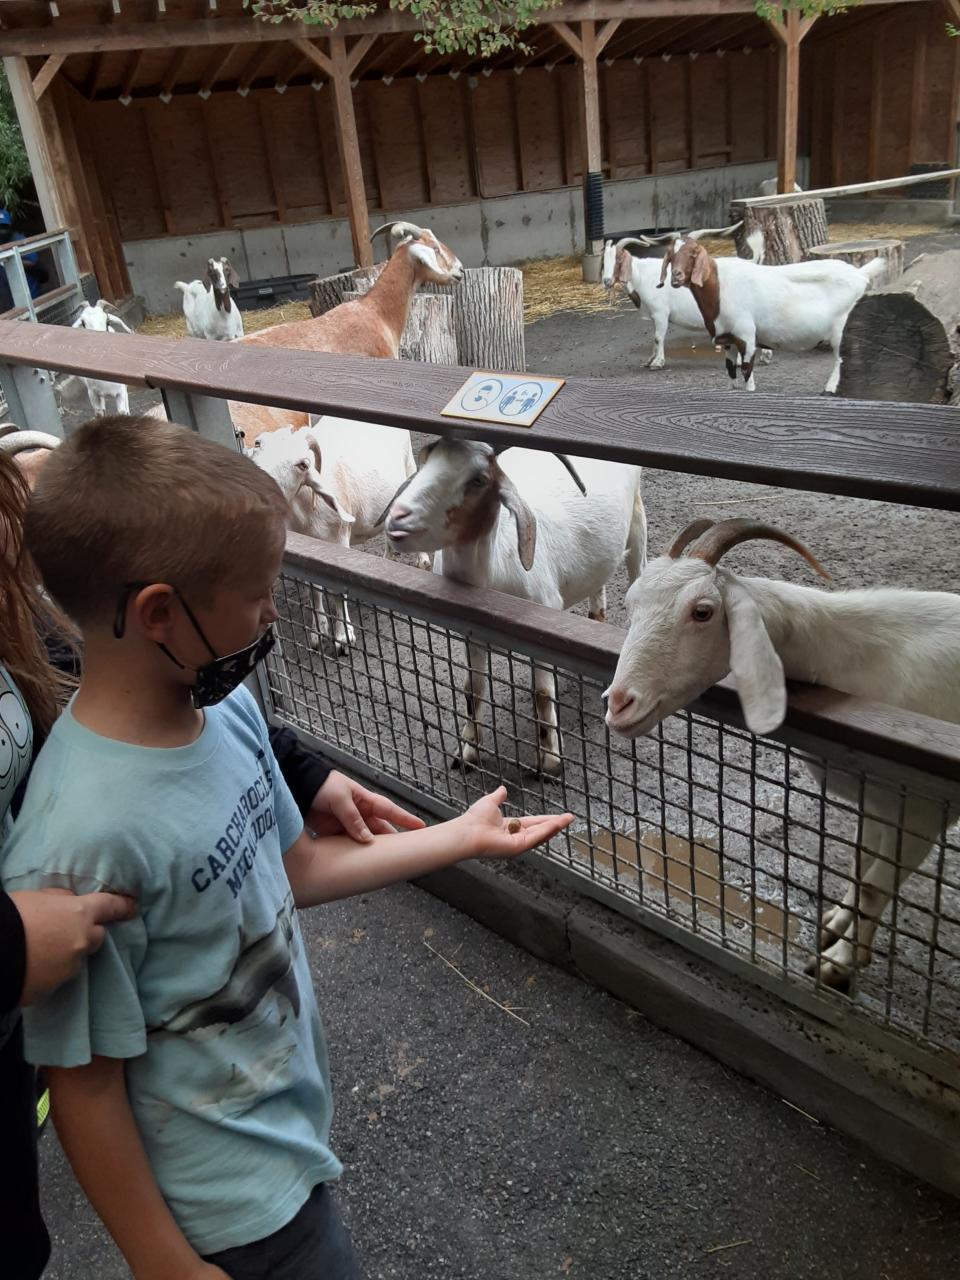 Visitors to the Children's Zoo at the Bronx Zoo can hand feed some of the animals, including goats.